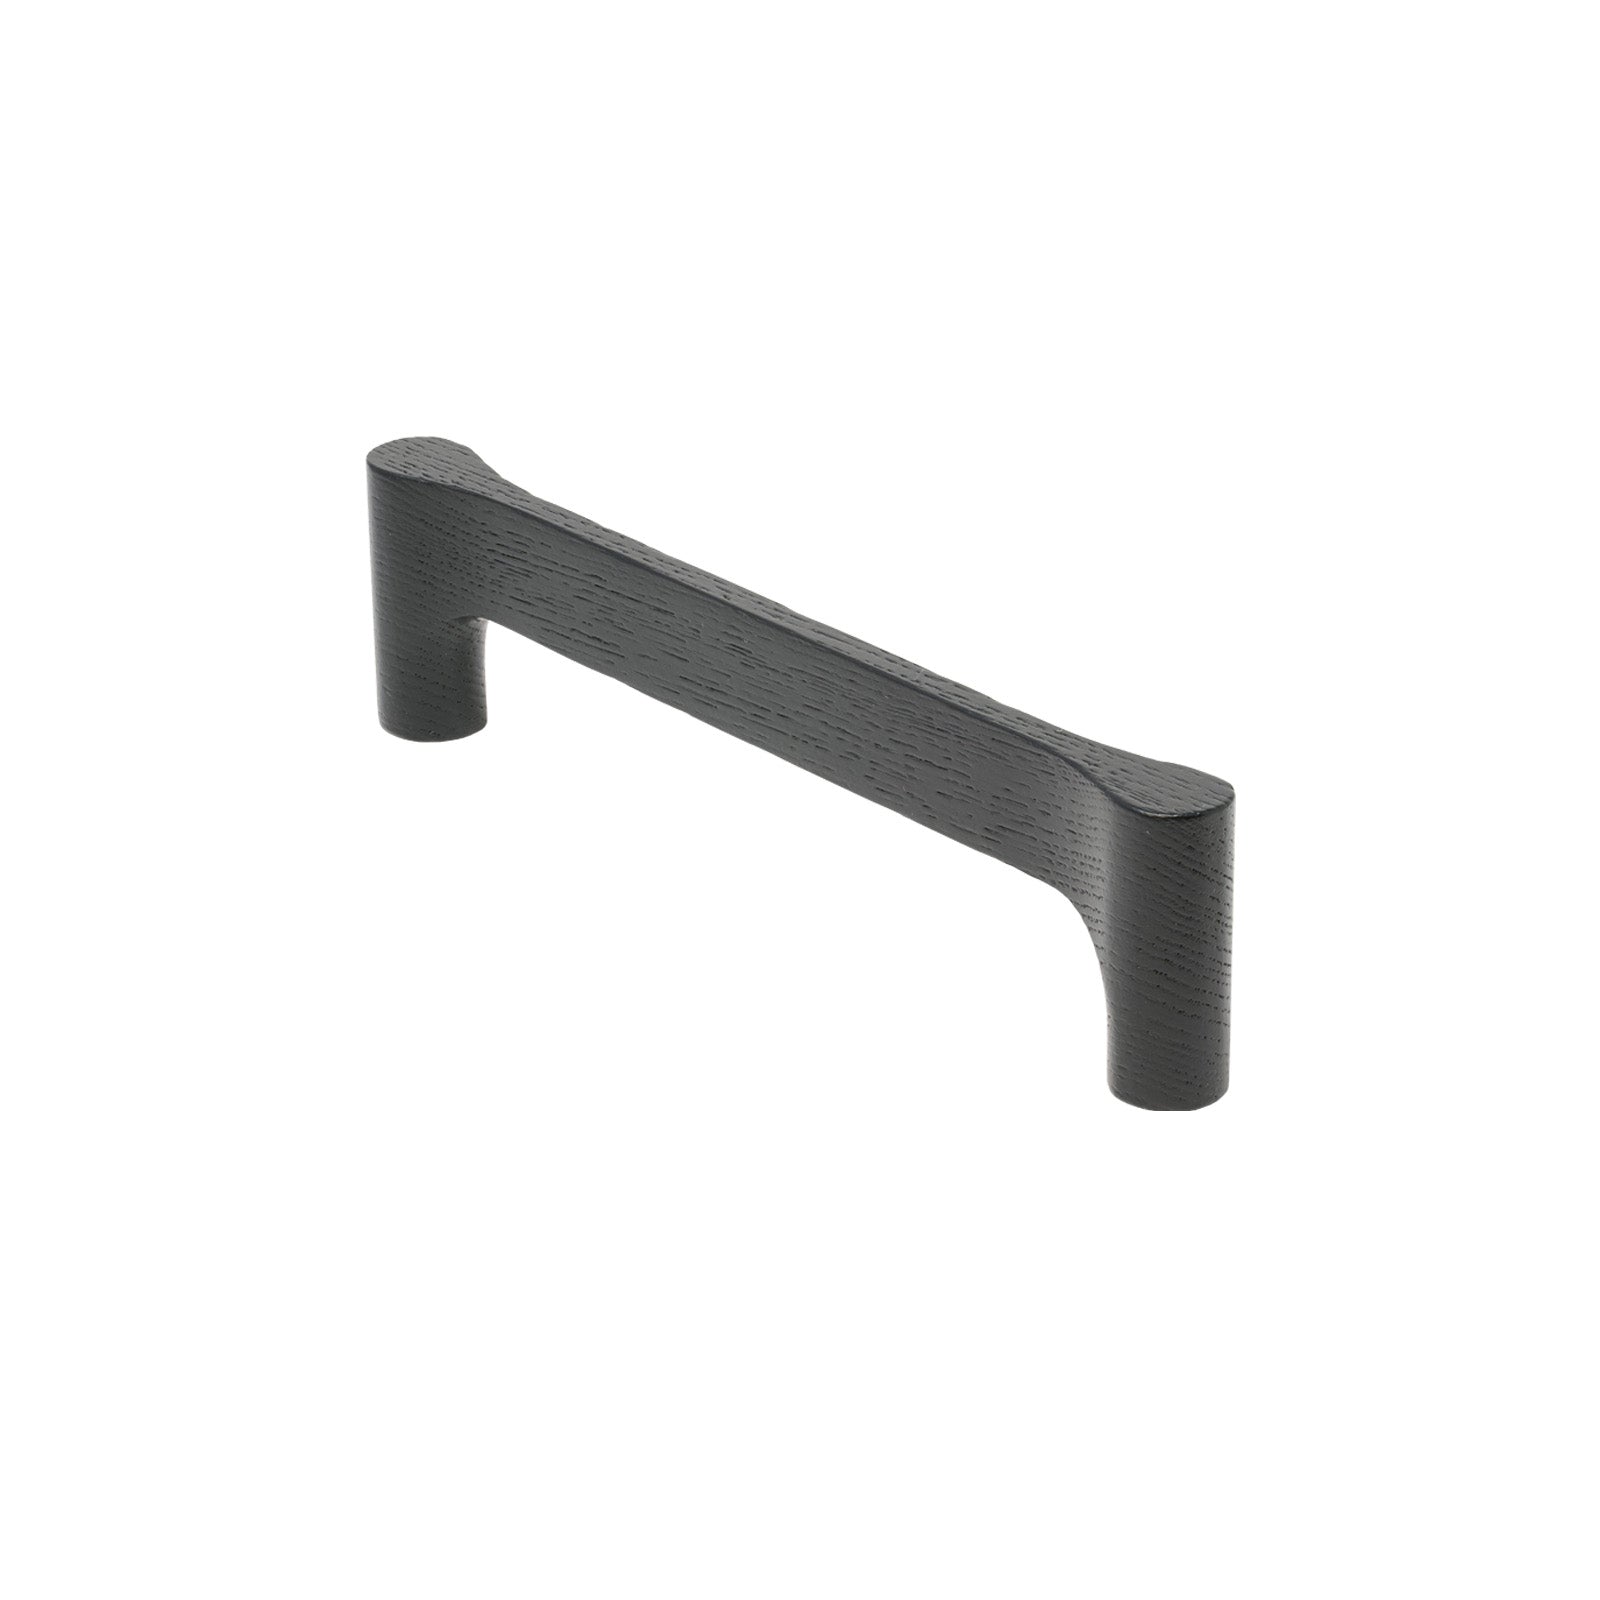 SHOW 160mm Gio Cabinet Pull Handle In Ash Finish